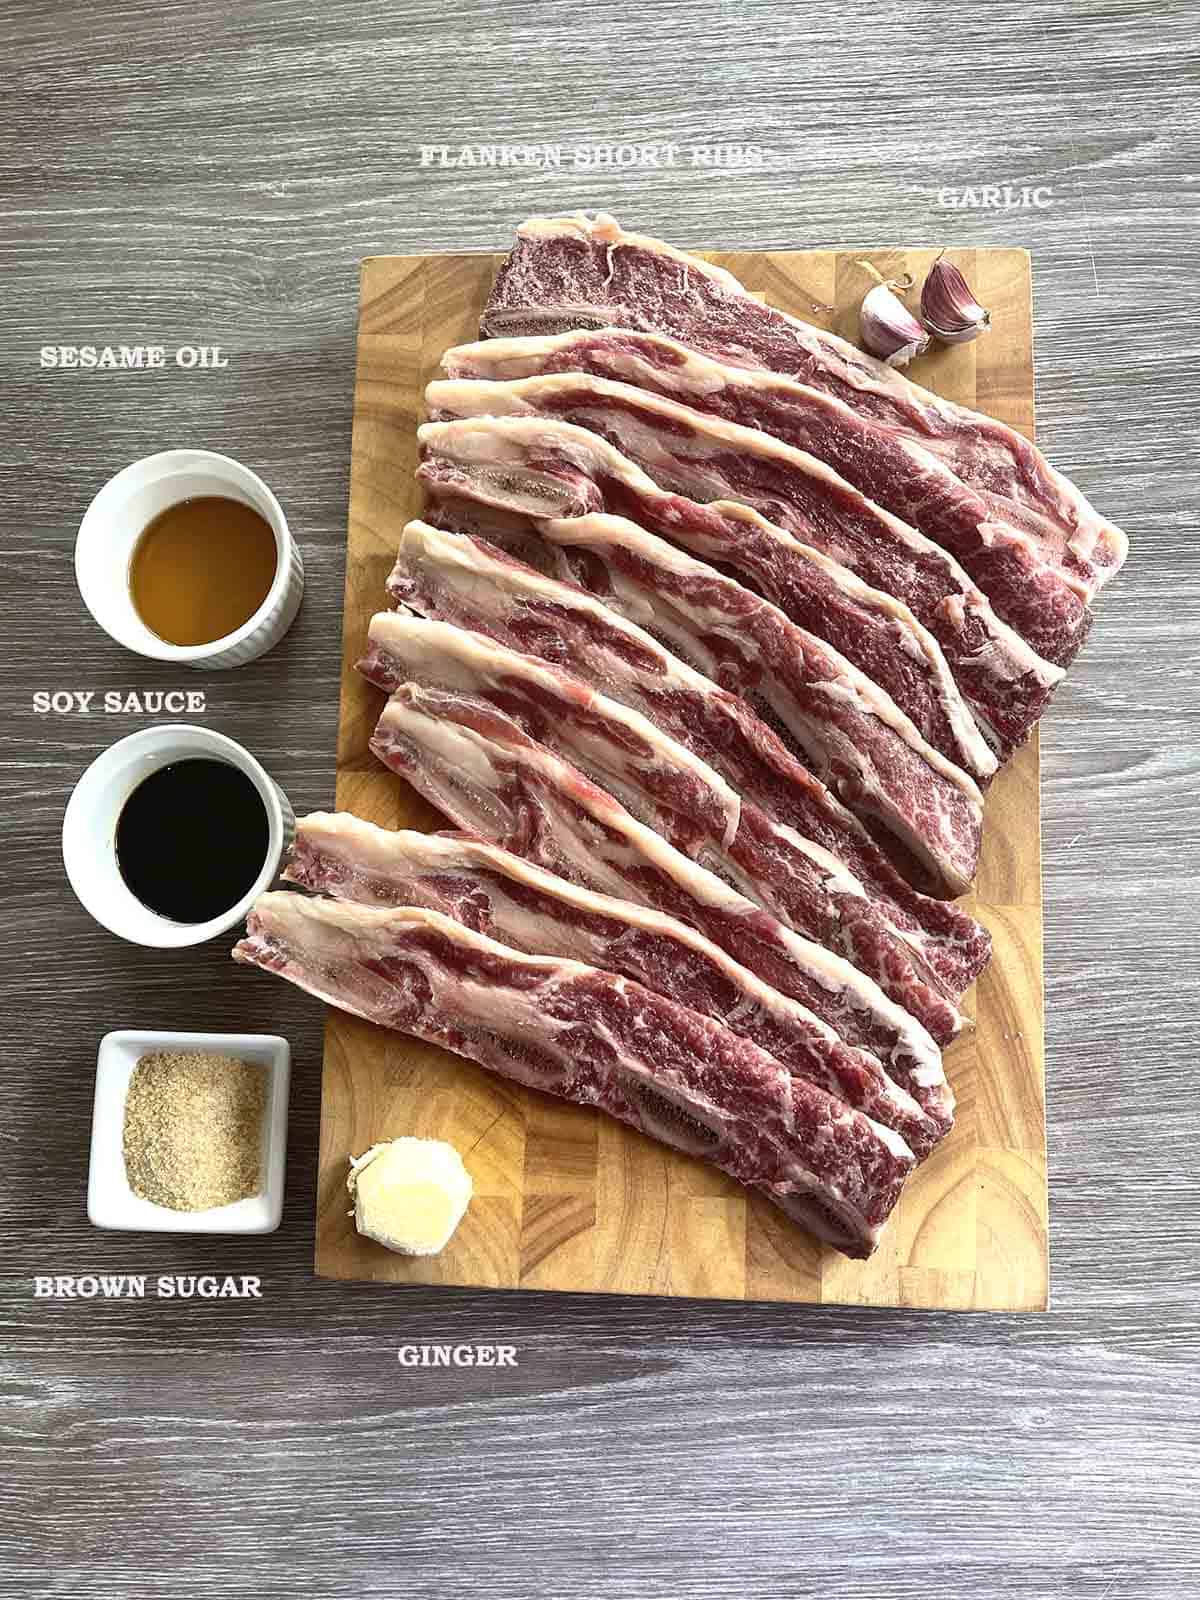 ingredients including beef flanken ribs, soy sauce, sesame oil, sugar and garlic and ginger.